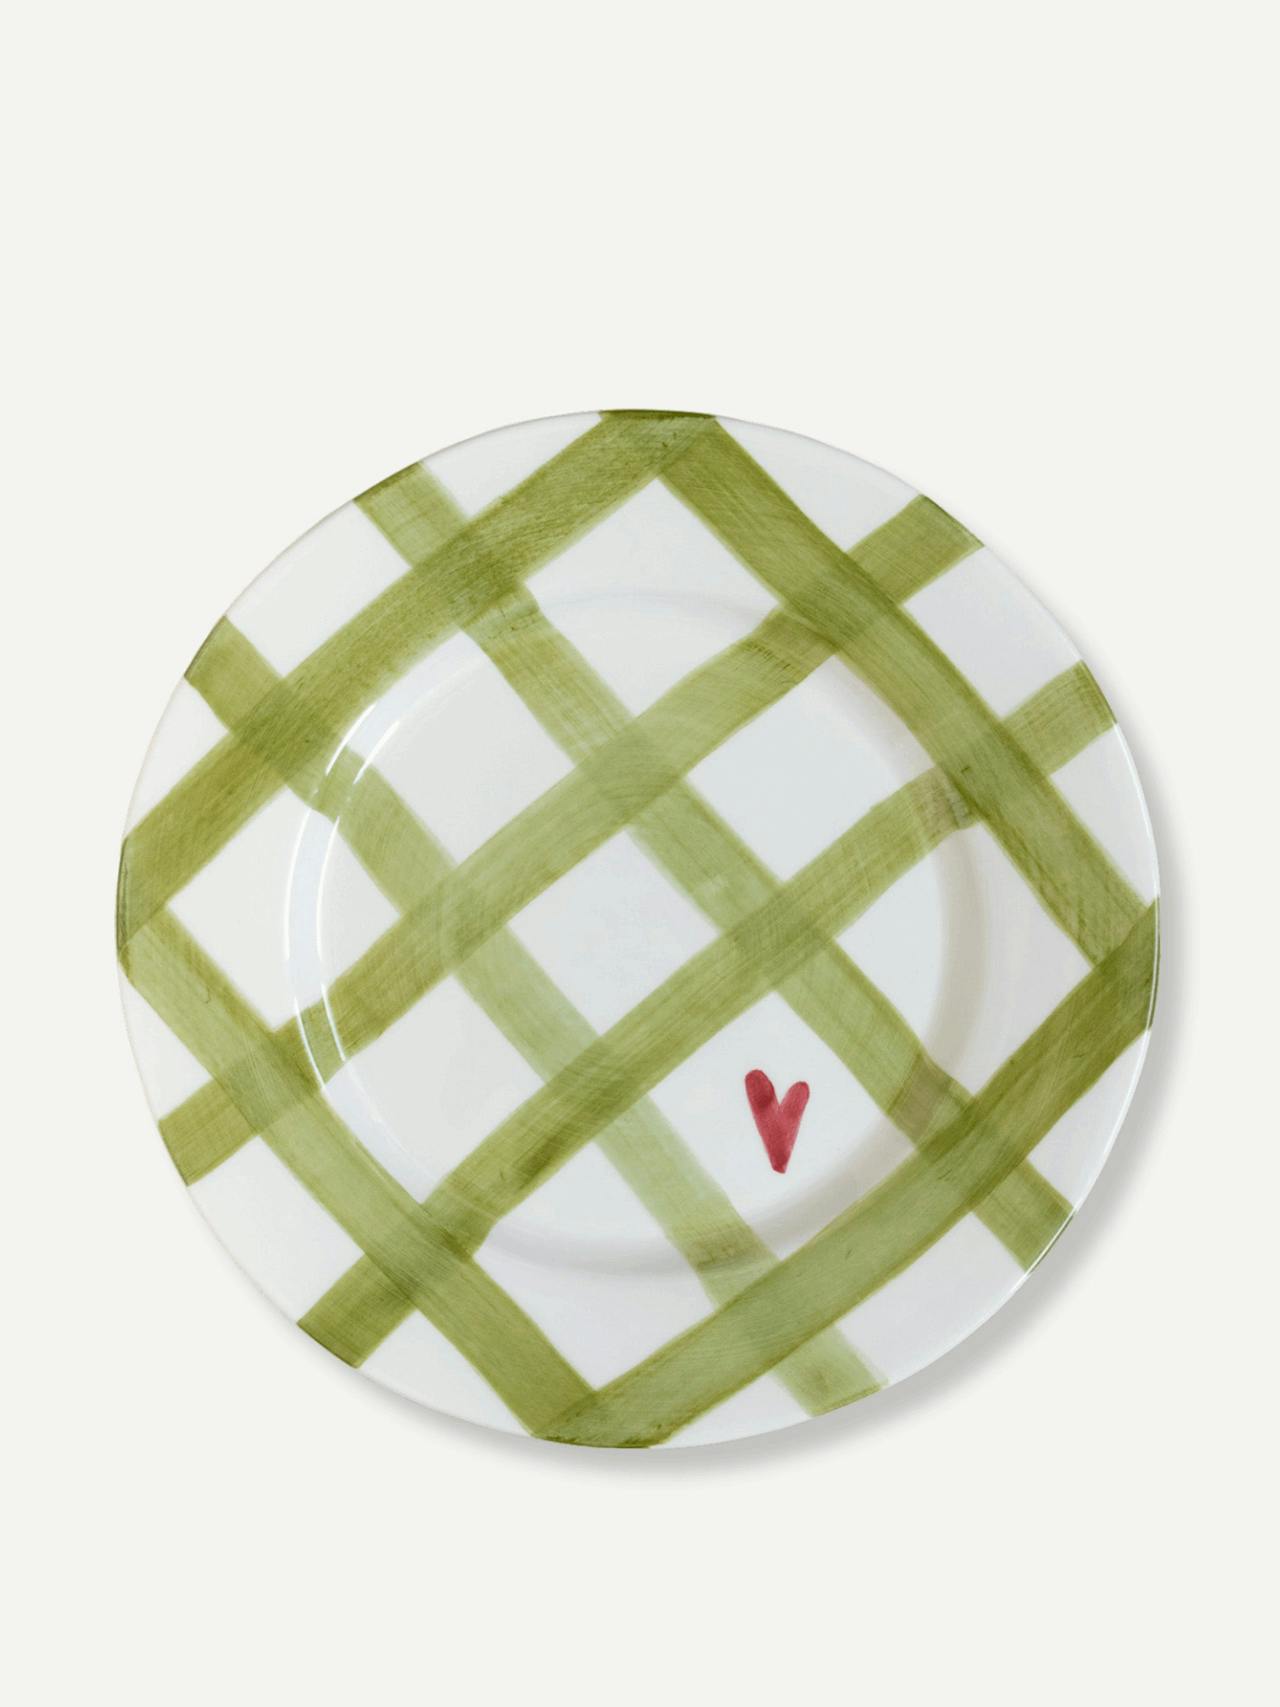 Picnic hand painted ceramic dinner plate